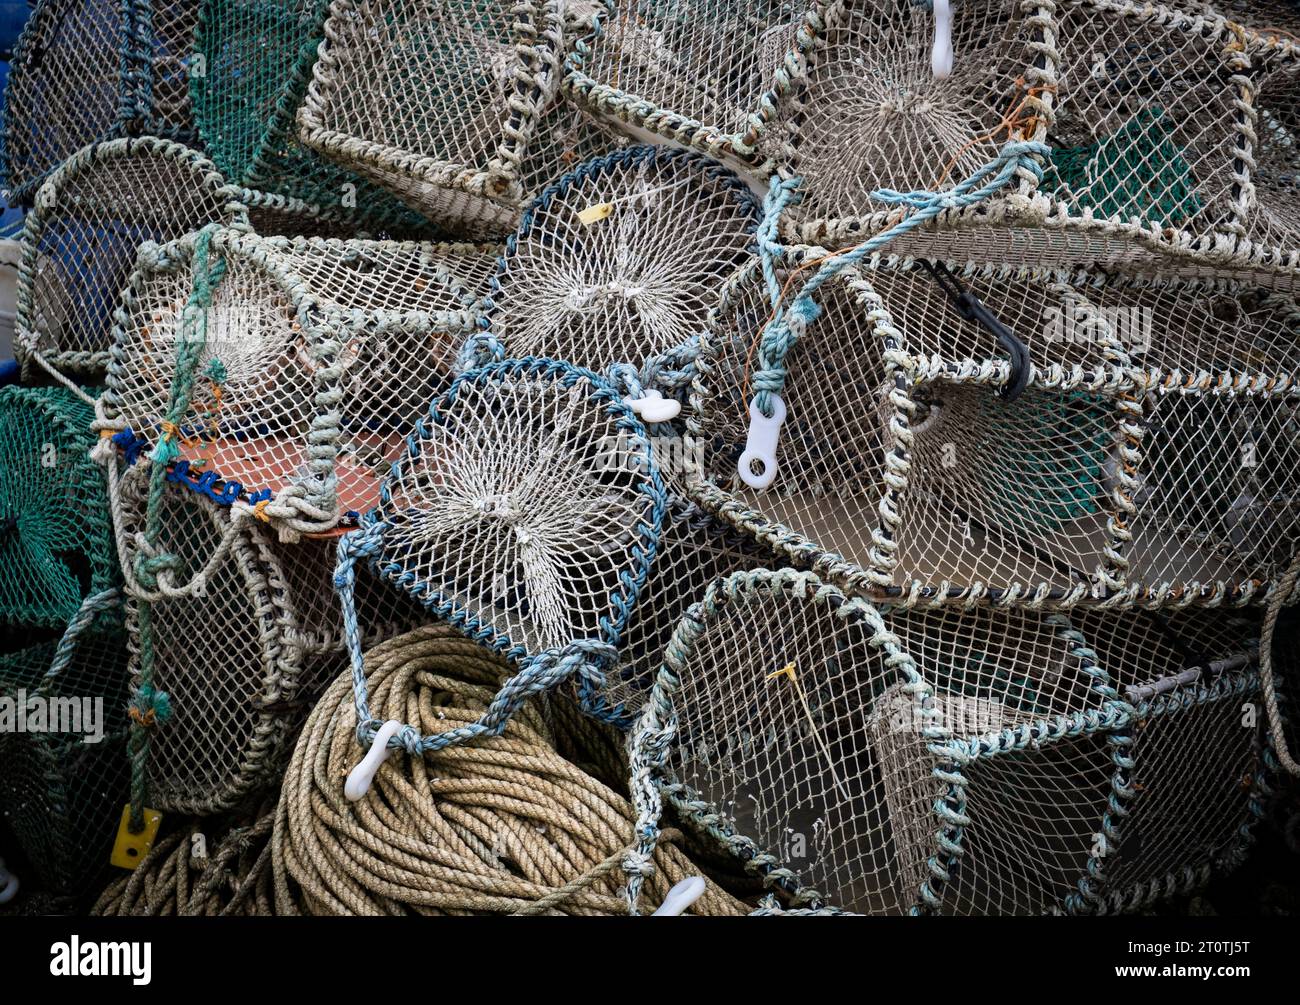 A pile of Crab and Lobster baskets on the Quay side at Poole in Dorset, ENgland. Stock Photo